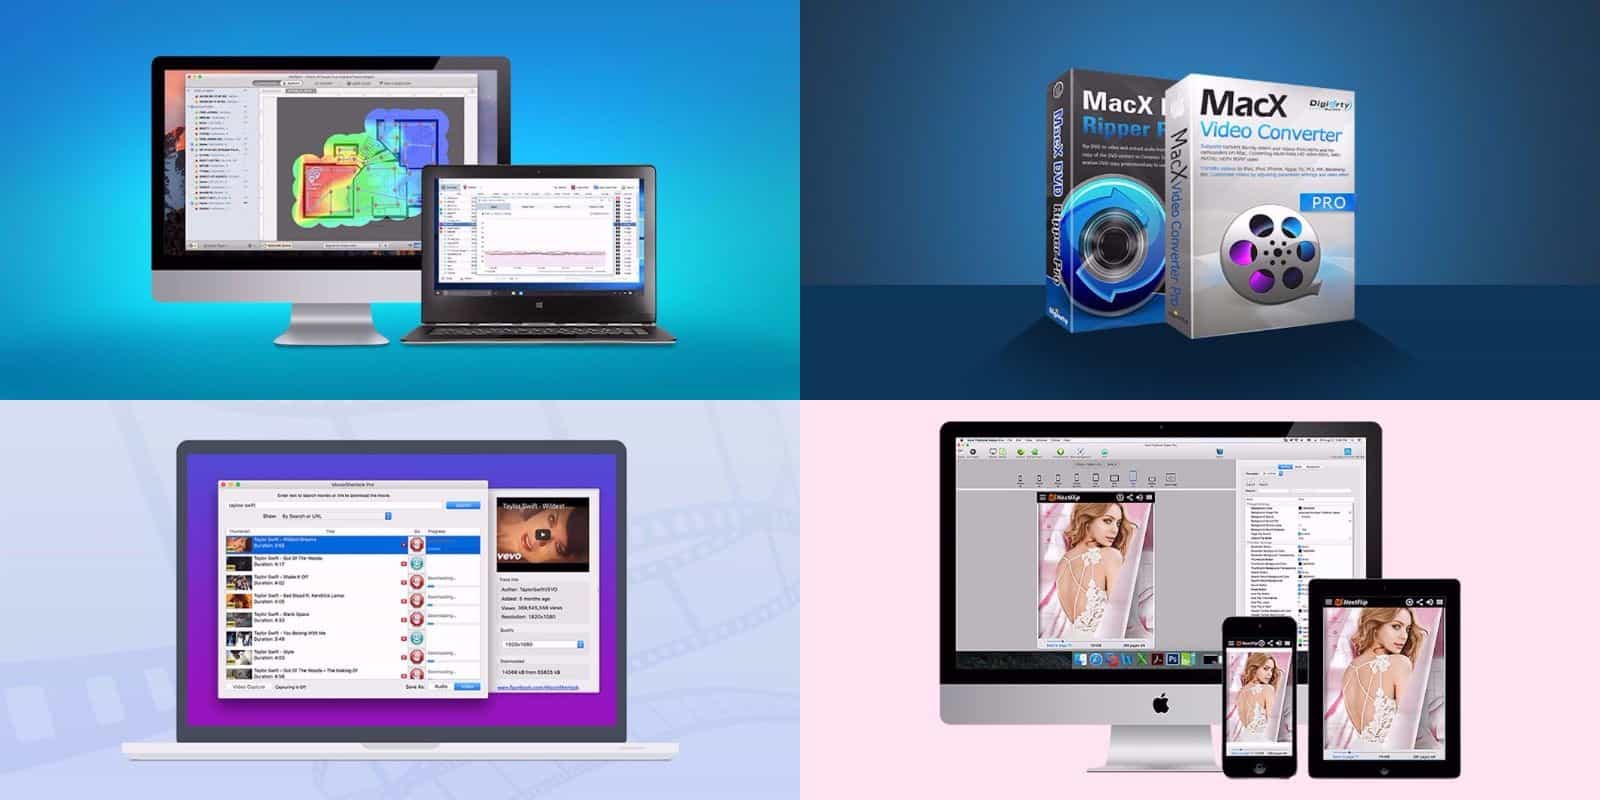 This bundle of Mac apps adds new ways to work with video, WiFi, PDFs, and more.